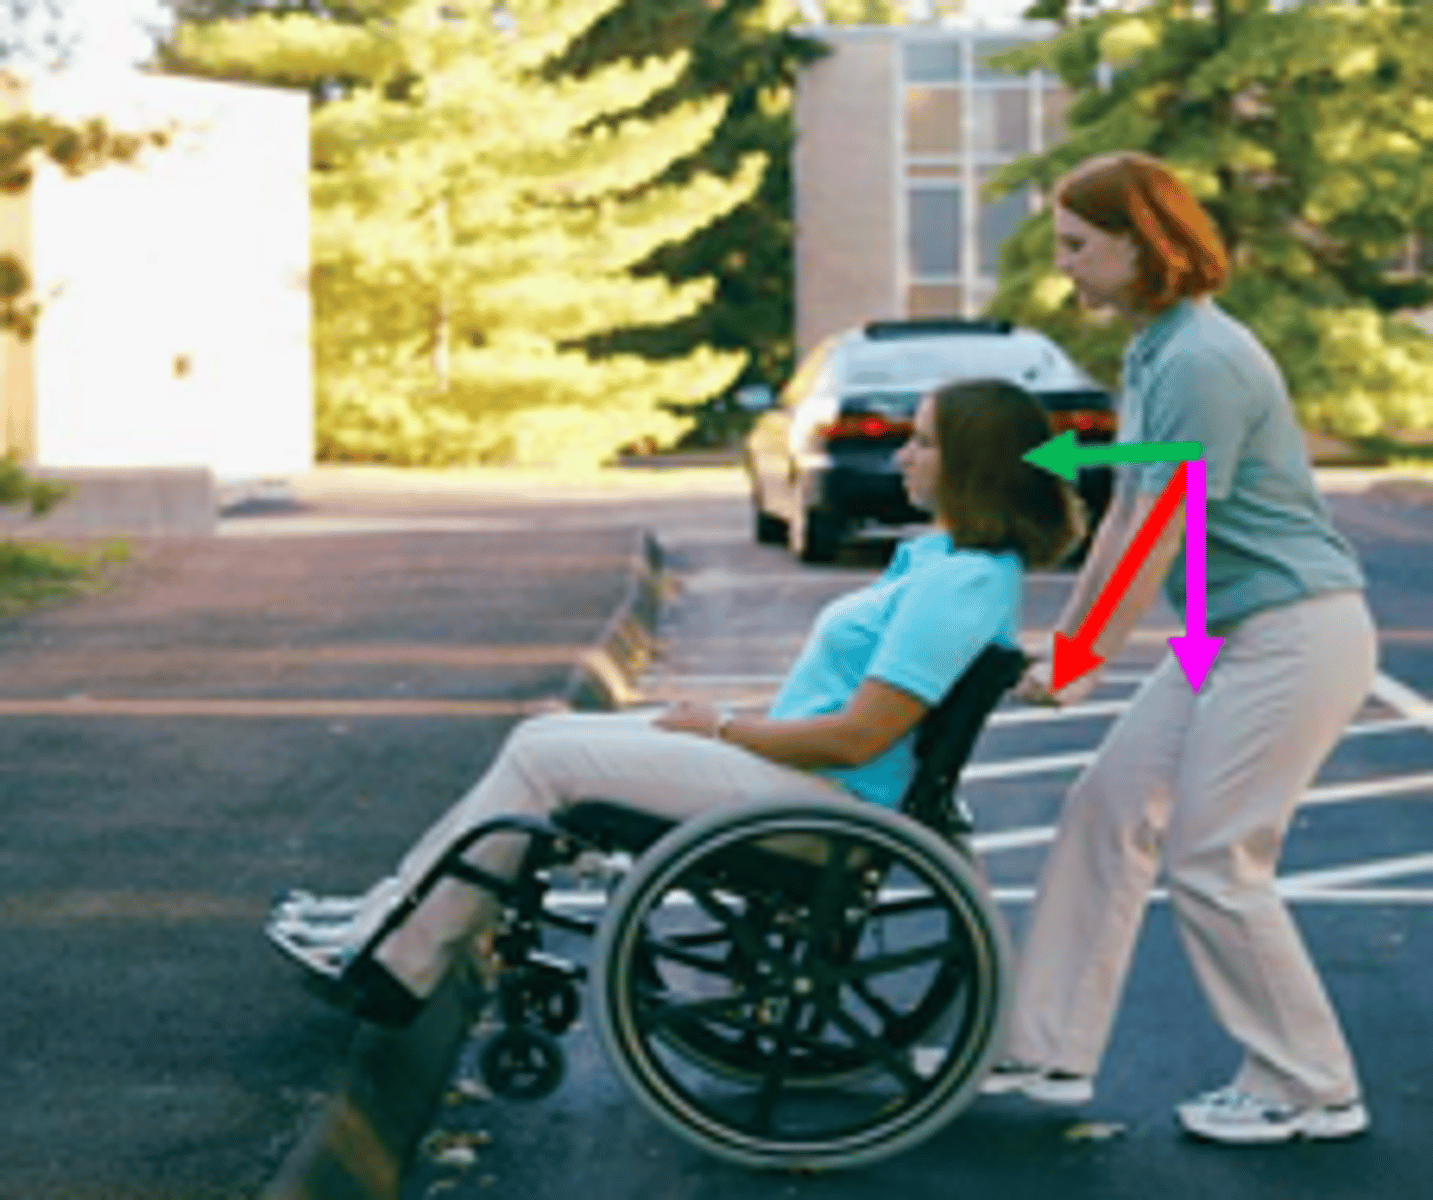 <p>So, is the PT pushing the wheelchair forward or downward? If both, in which direction is she pushing more?</p>